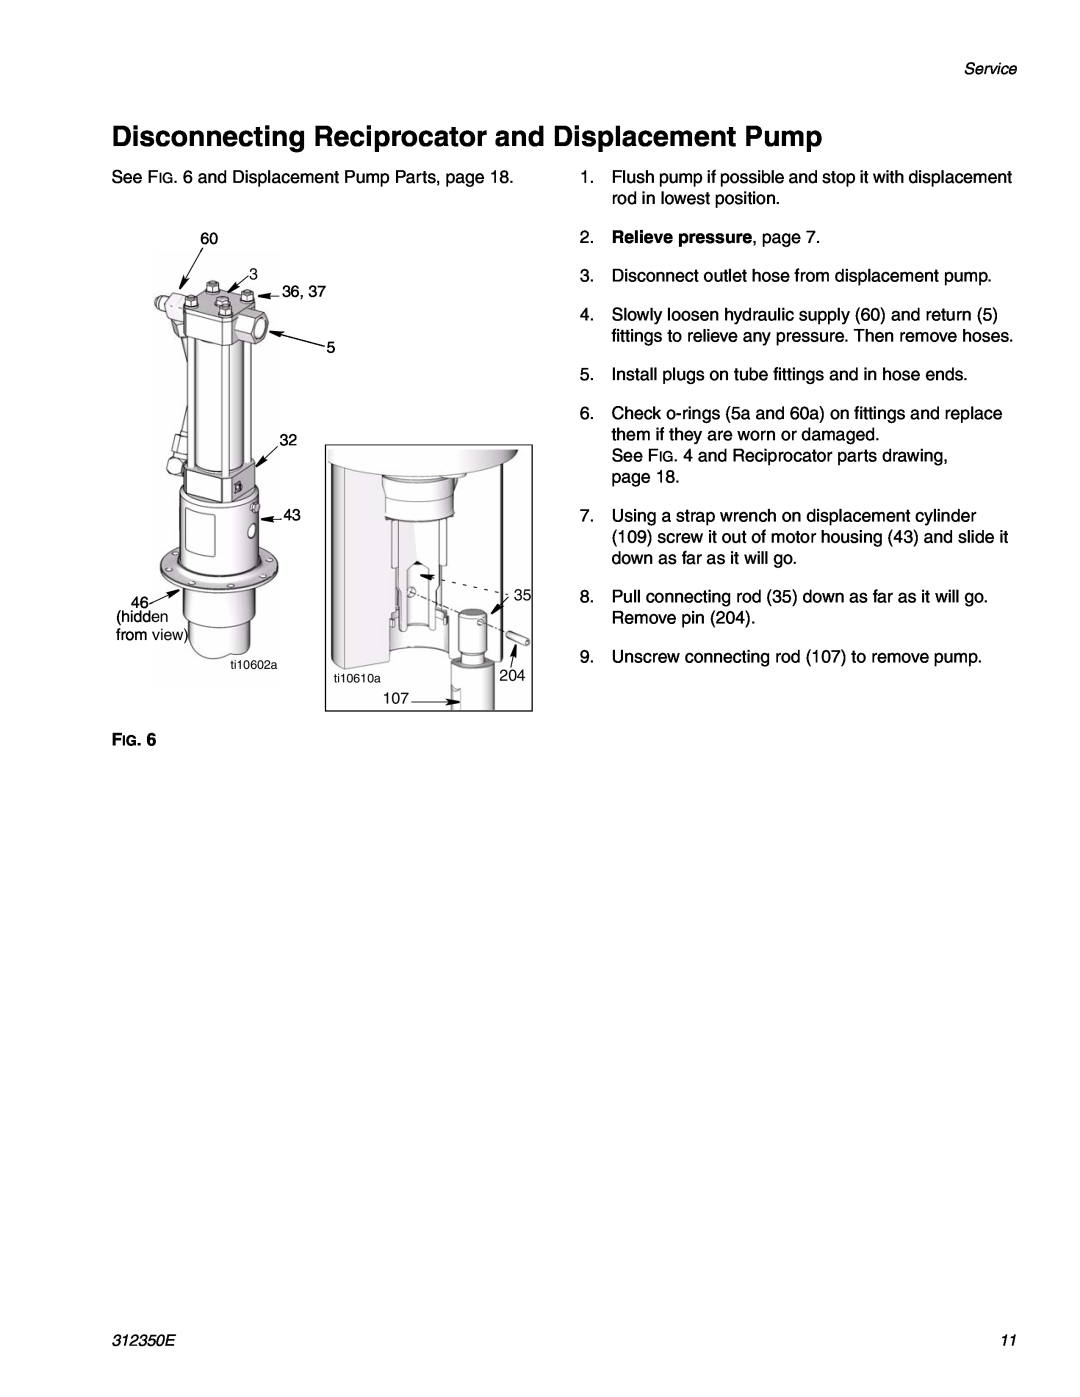 Hitachi 312350E important safety instructions Disconnecting Reciprocator and Displacement Pump, Relieve pressure, page 